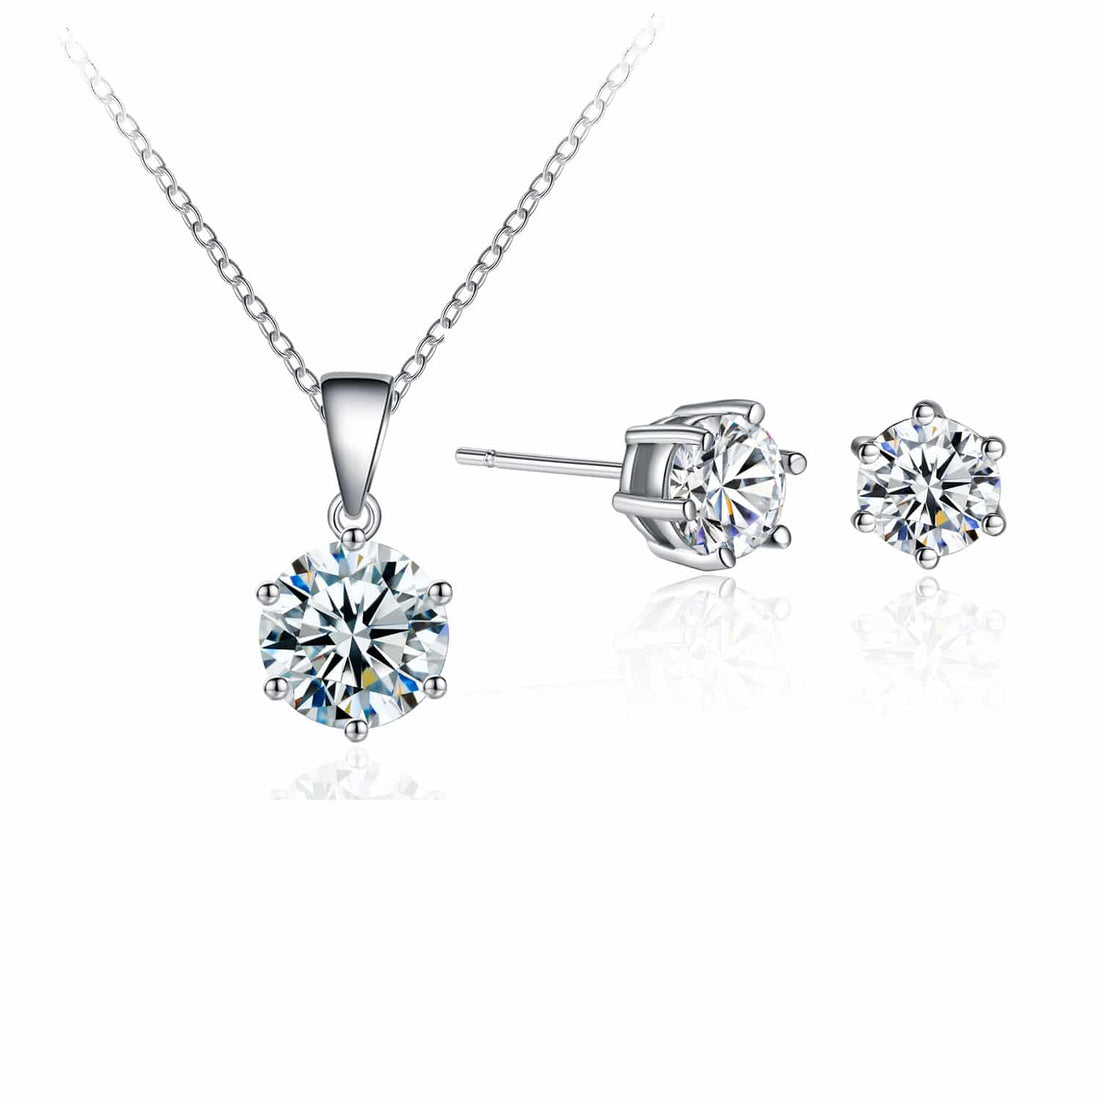 Solitaire Pendant, Stud Earings Made with Swarovski Elements and Single Row Tennis Bracelet